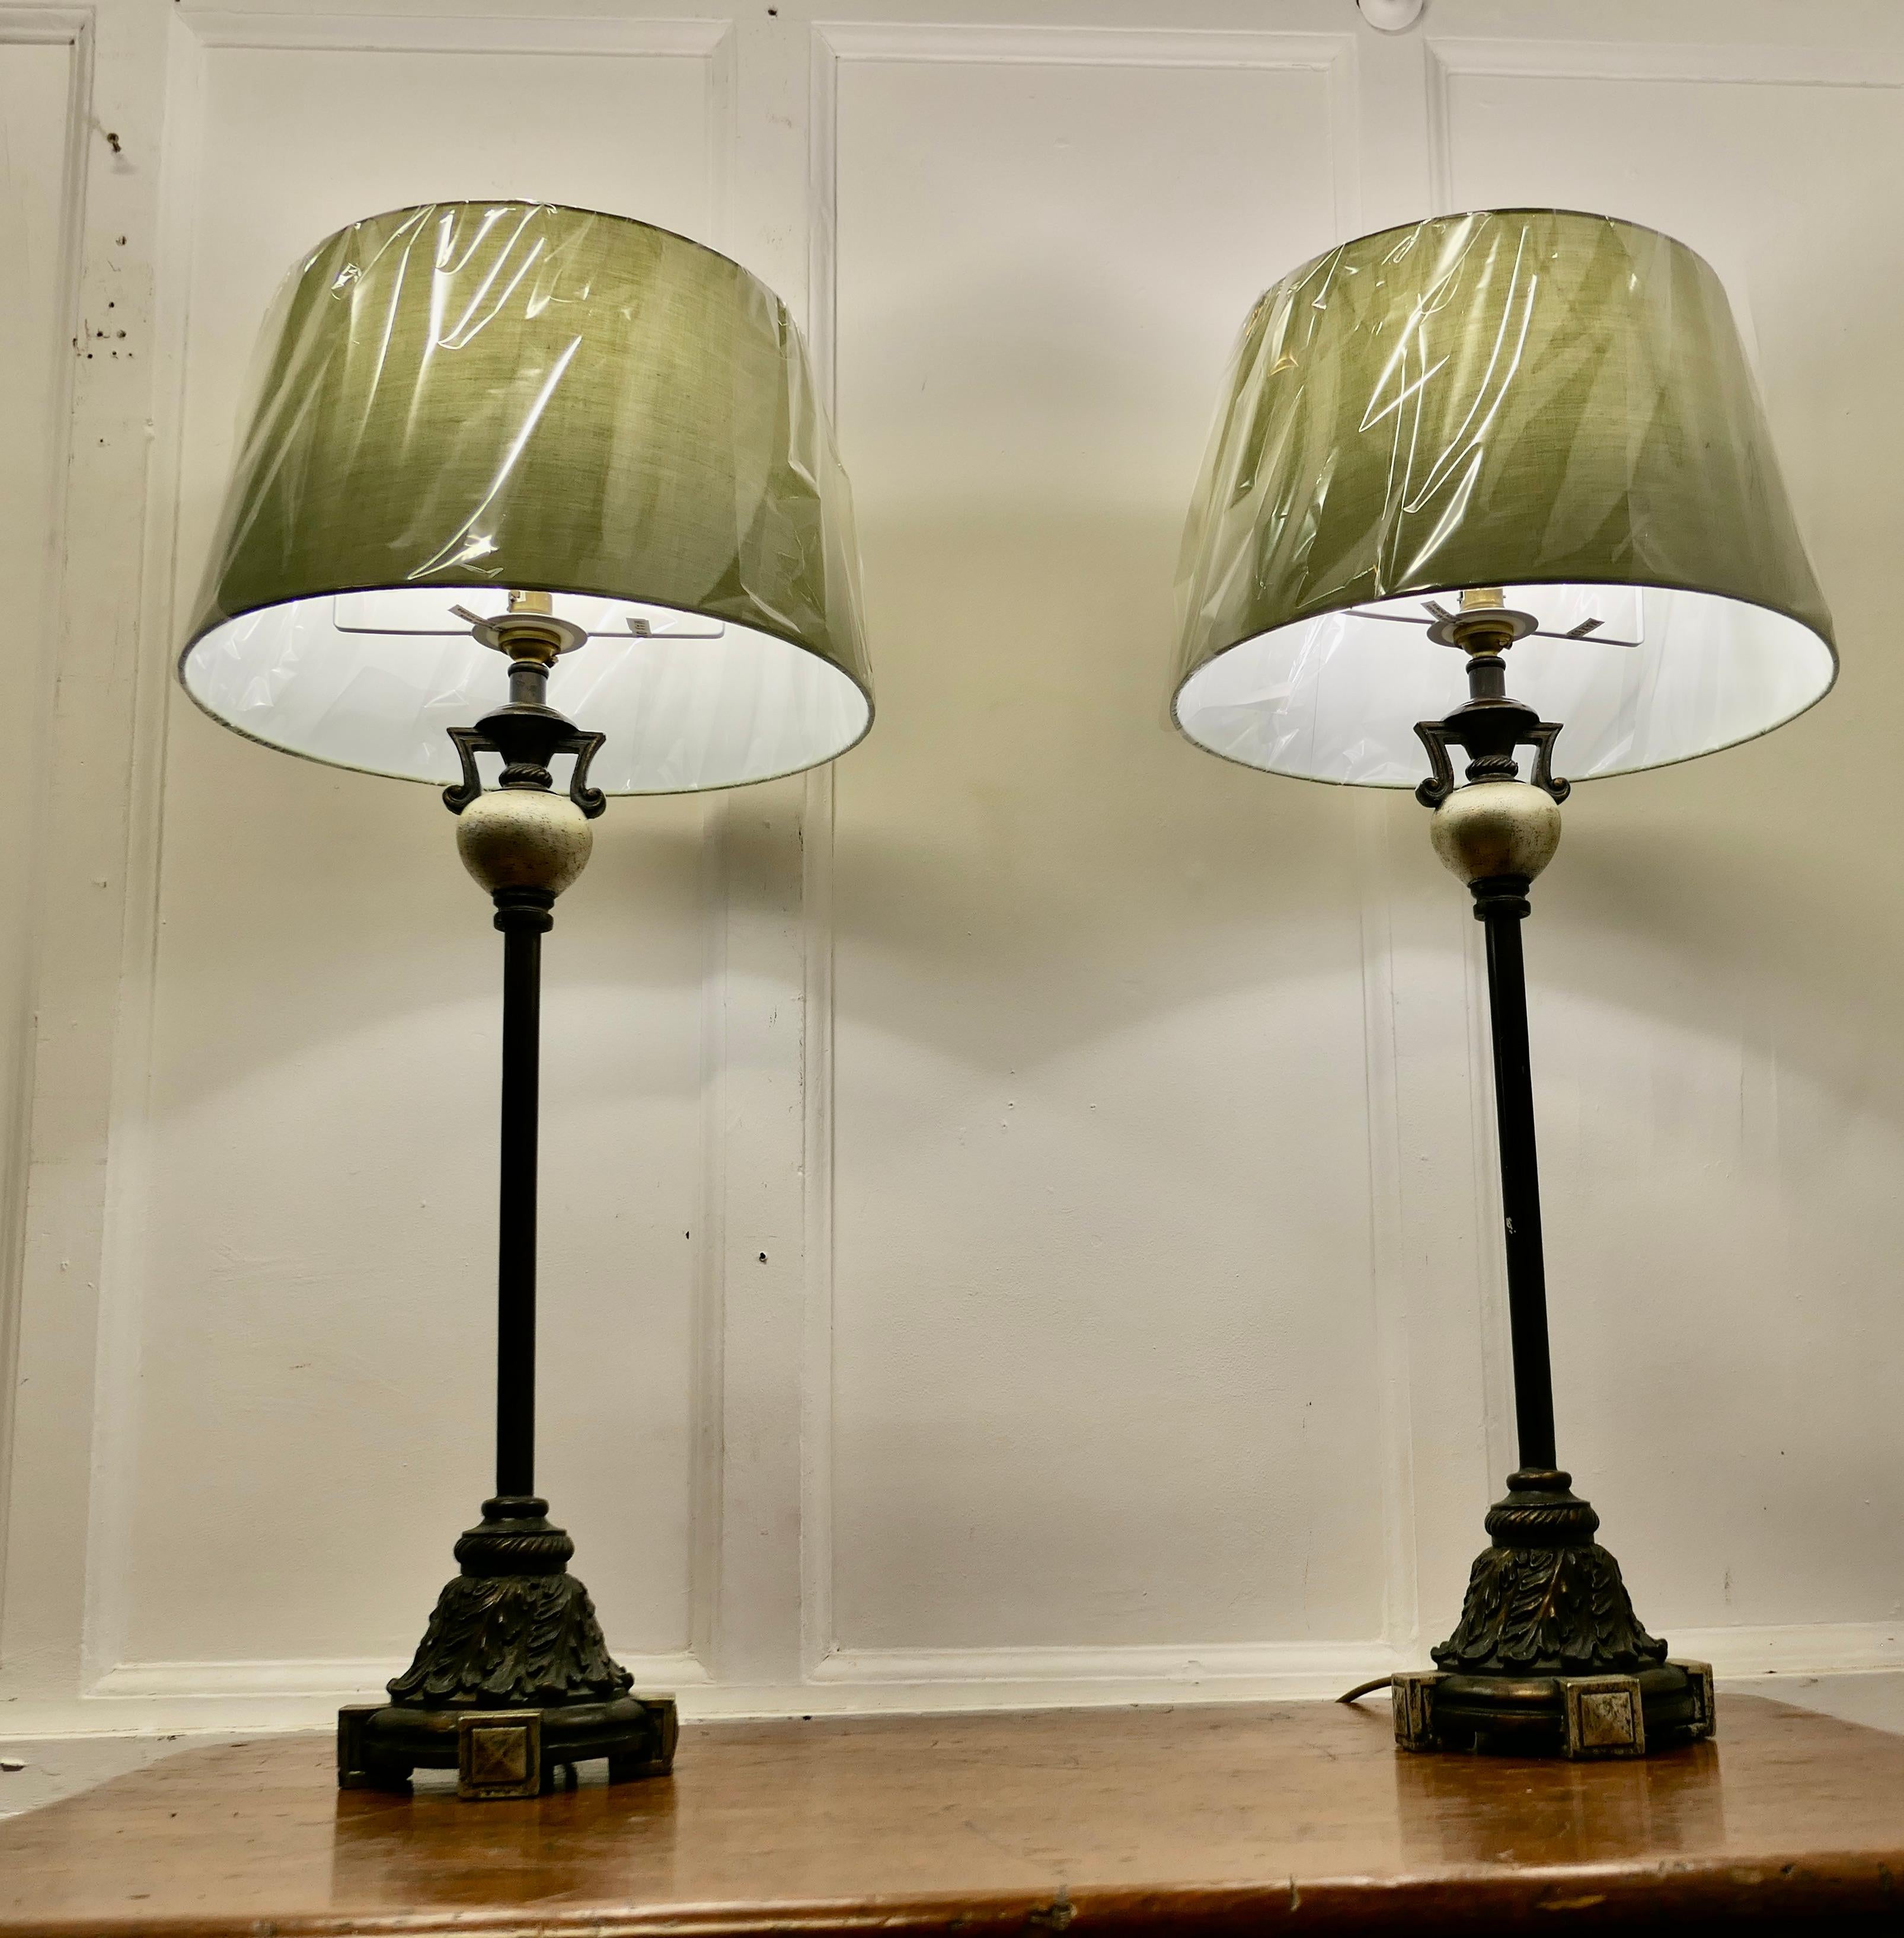 Pair of  Tall Classical Style Column Table Lamps

These are a very stylish pair of Bronzed finish column lamps
The main columns are supported on an elaborate stepped bronzed base decorated with acanthus leaves, at the top they have a more bulbous